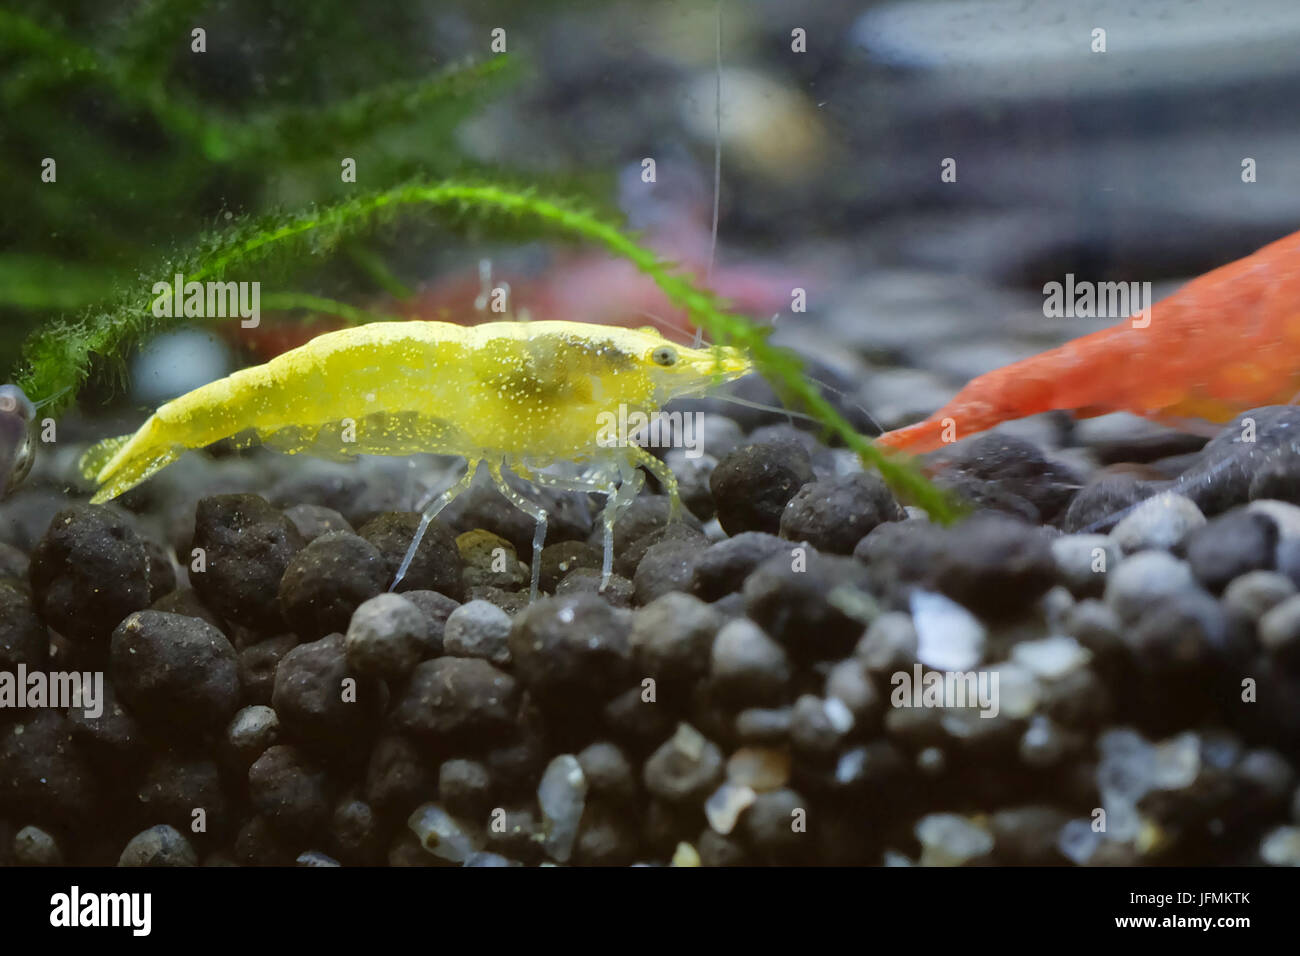 Portrait of a Golden Yellow Shrimp with a Red Cherry Shrimp Stock Photo